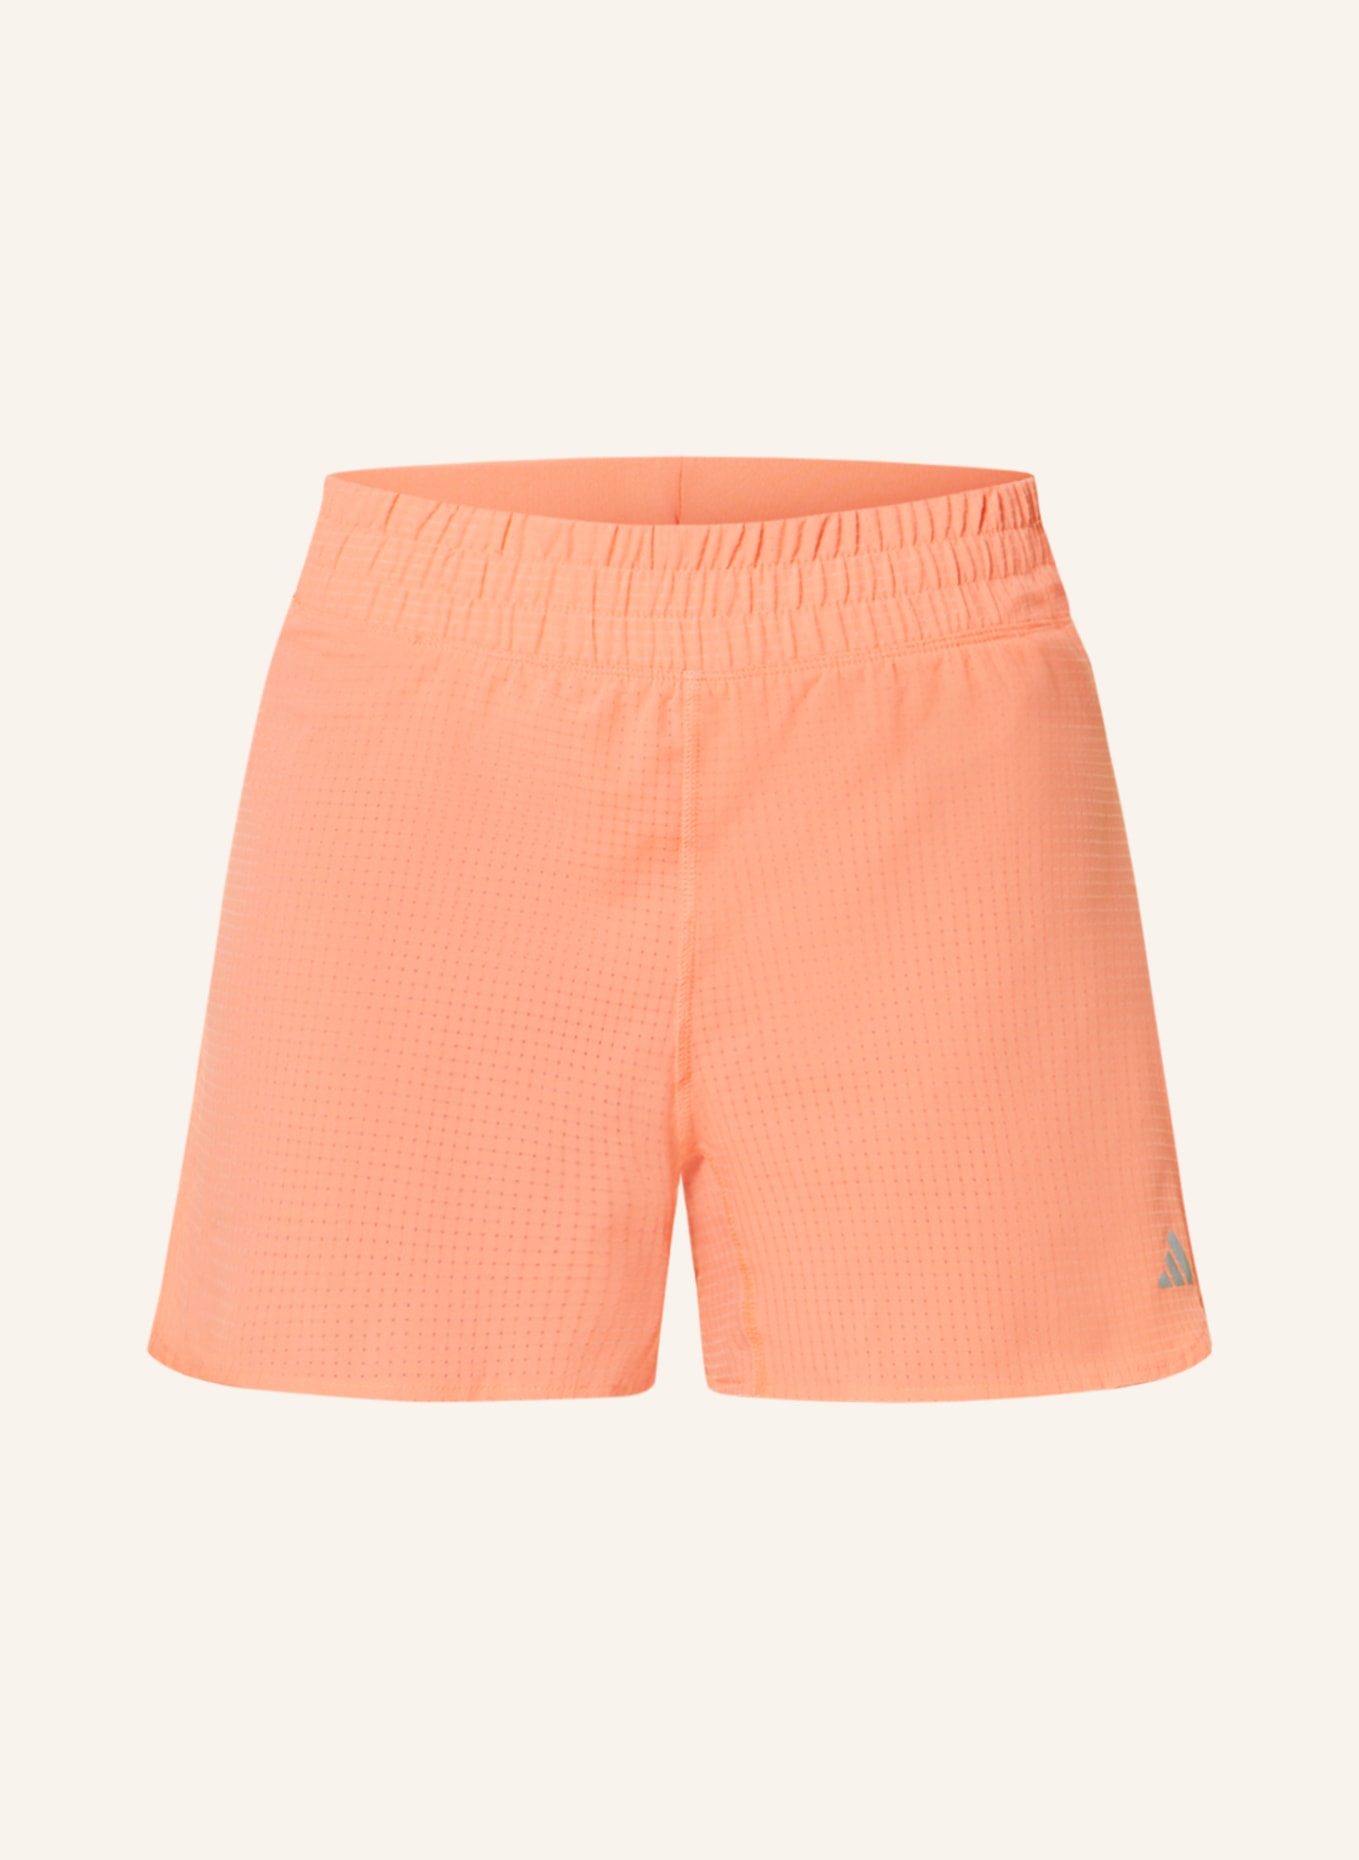 adidas 2-in-1-Laufshorts PROTECT AT DAY X-CITY HEAT.RDY, Farbe: NEONORANGE (Bild 1)